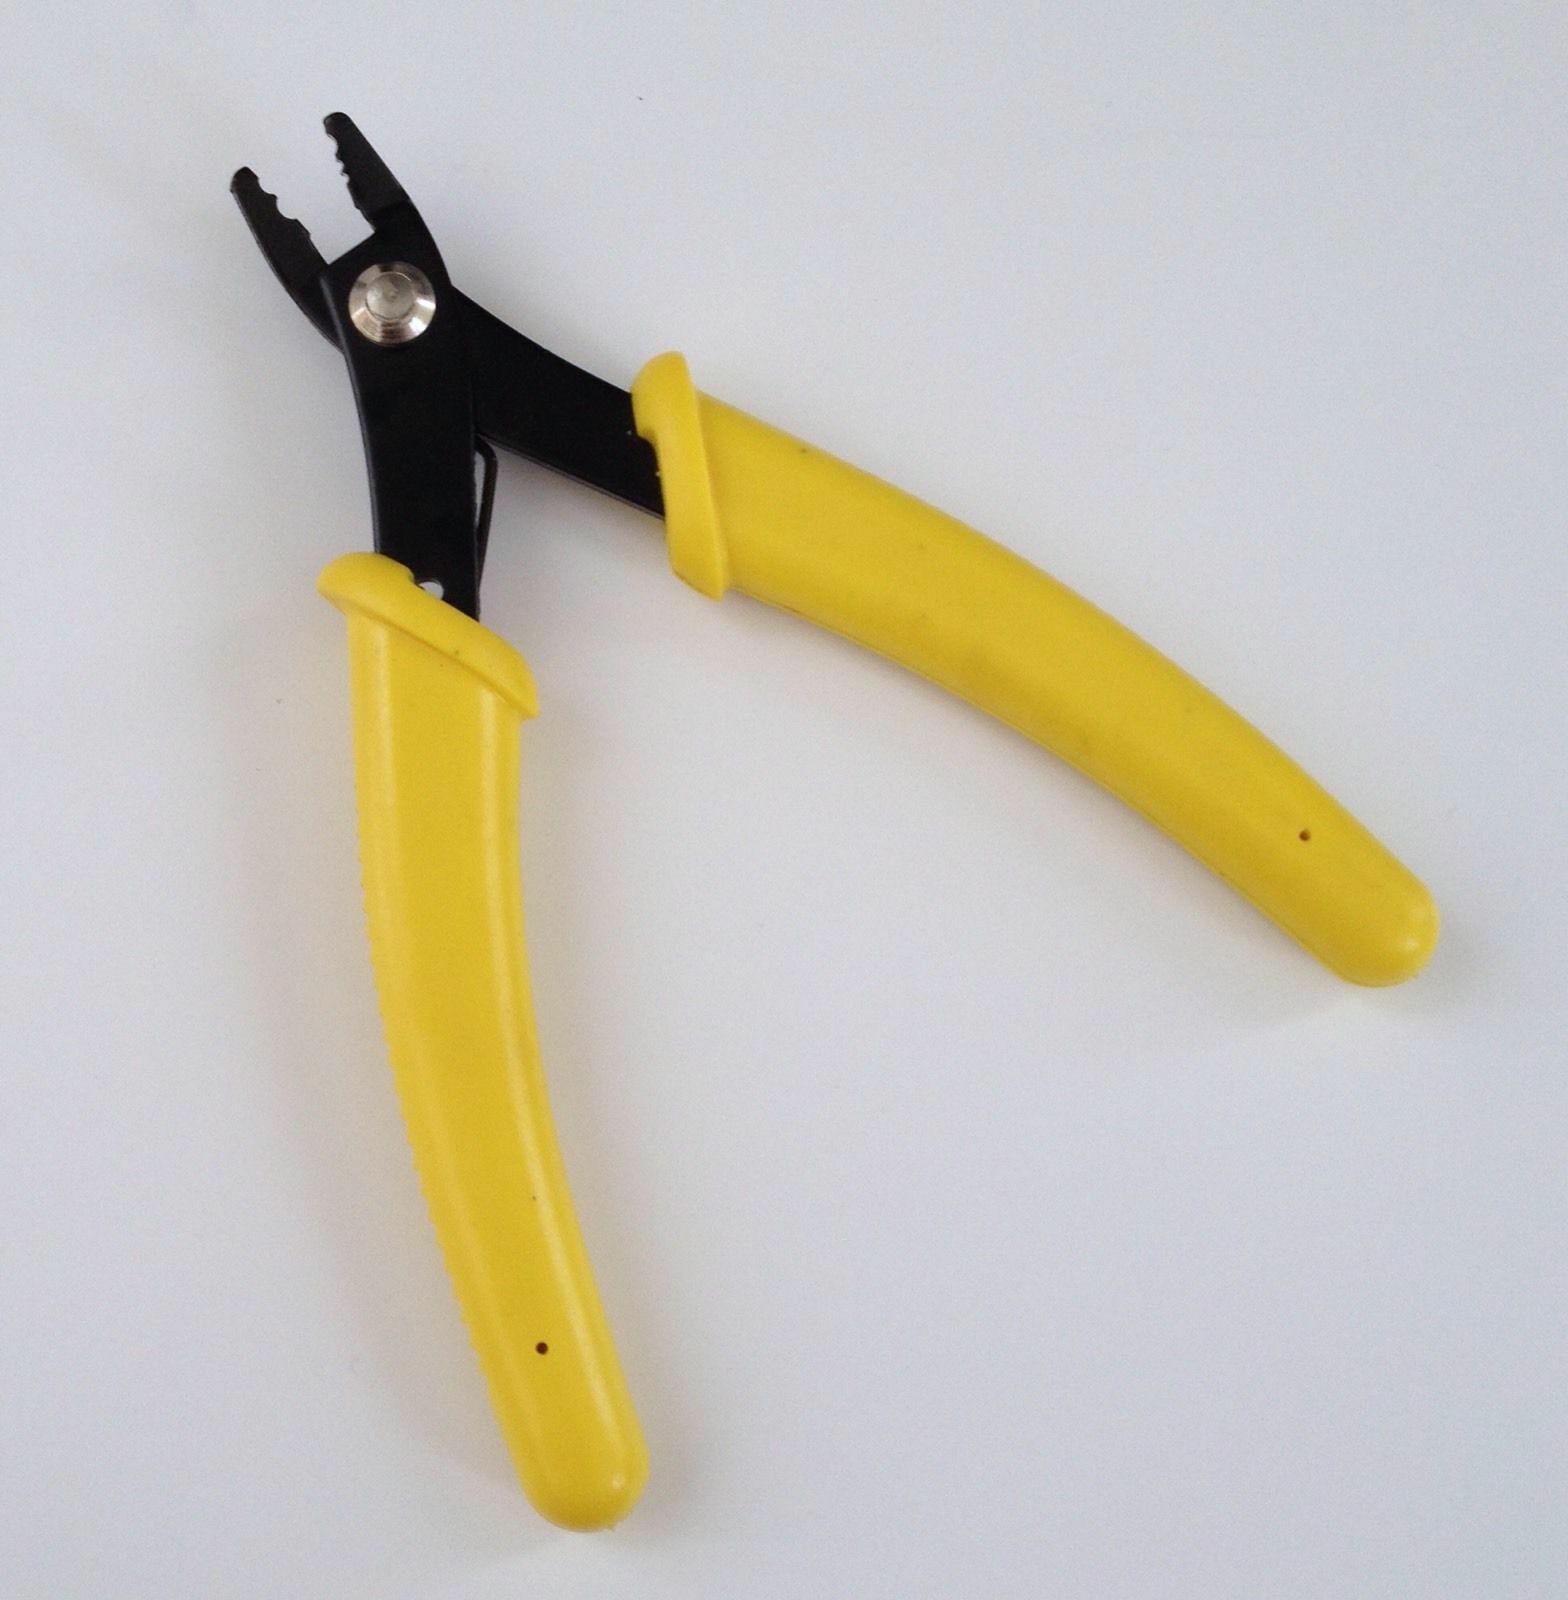 New 5" (13cm) Crimper Pliers Jewelry Tools Beading Crimping Wire Supplies Beads